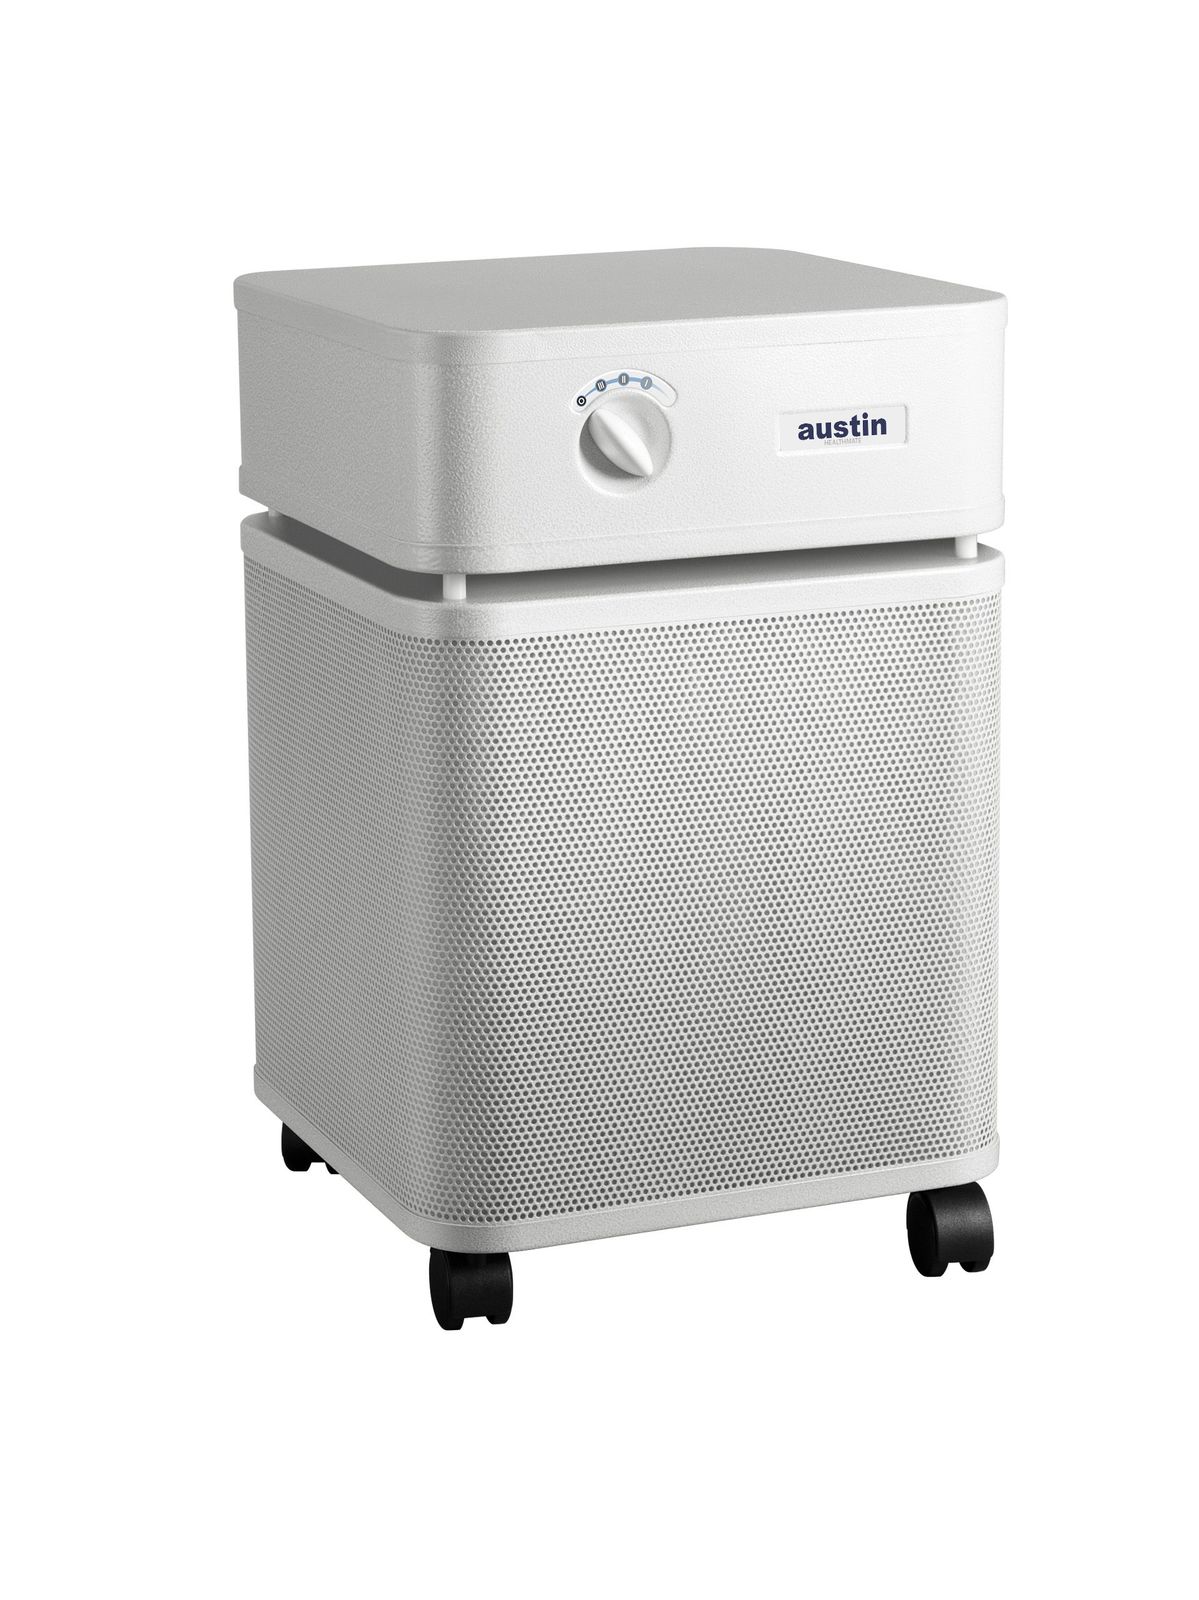 Primary image for Austin Air HealthMate Air Cleaner - White